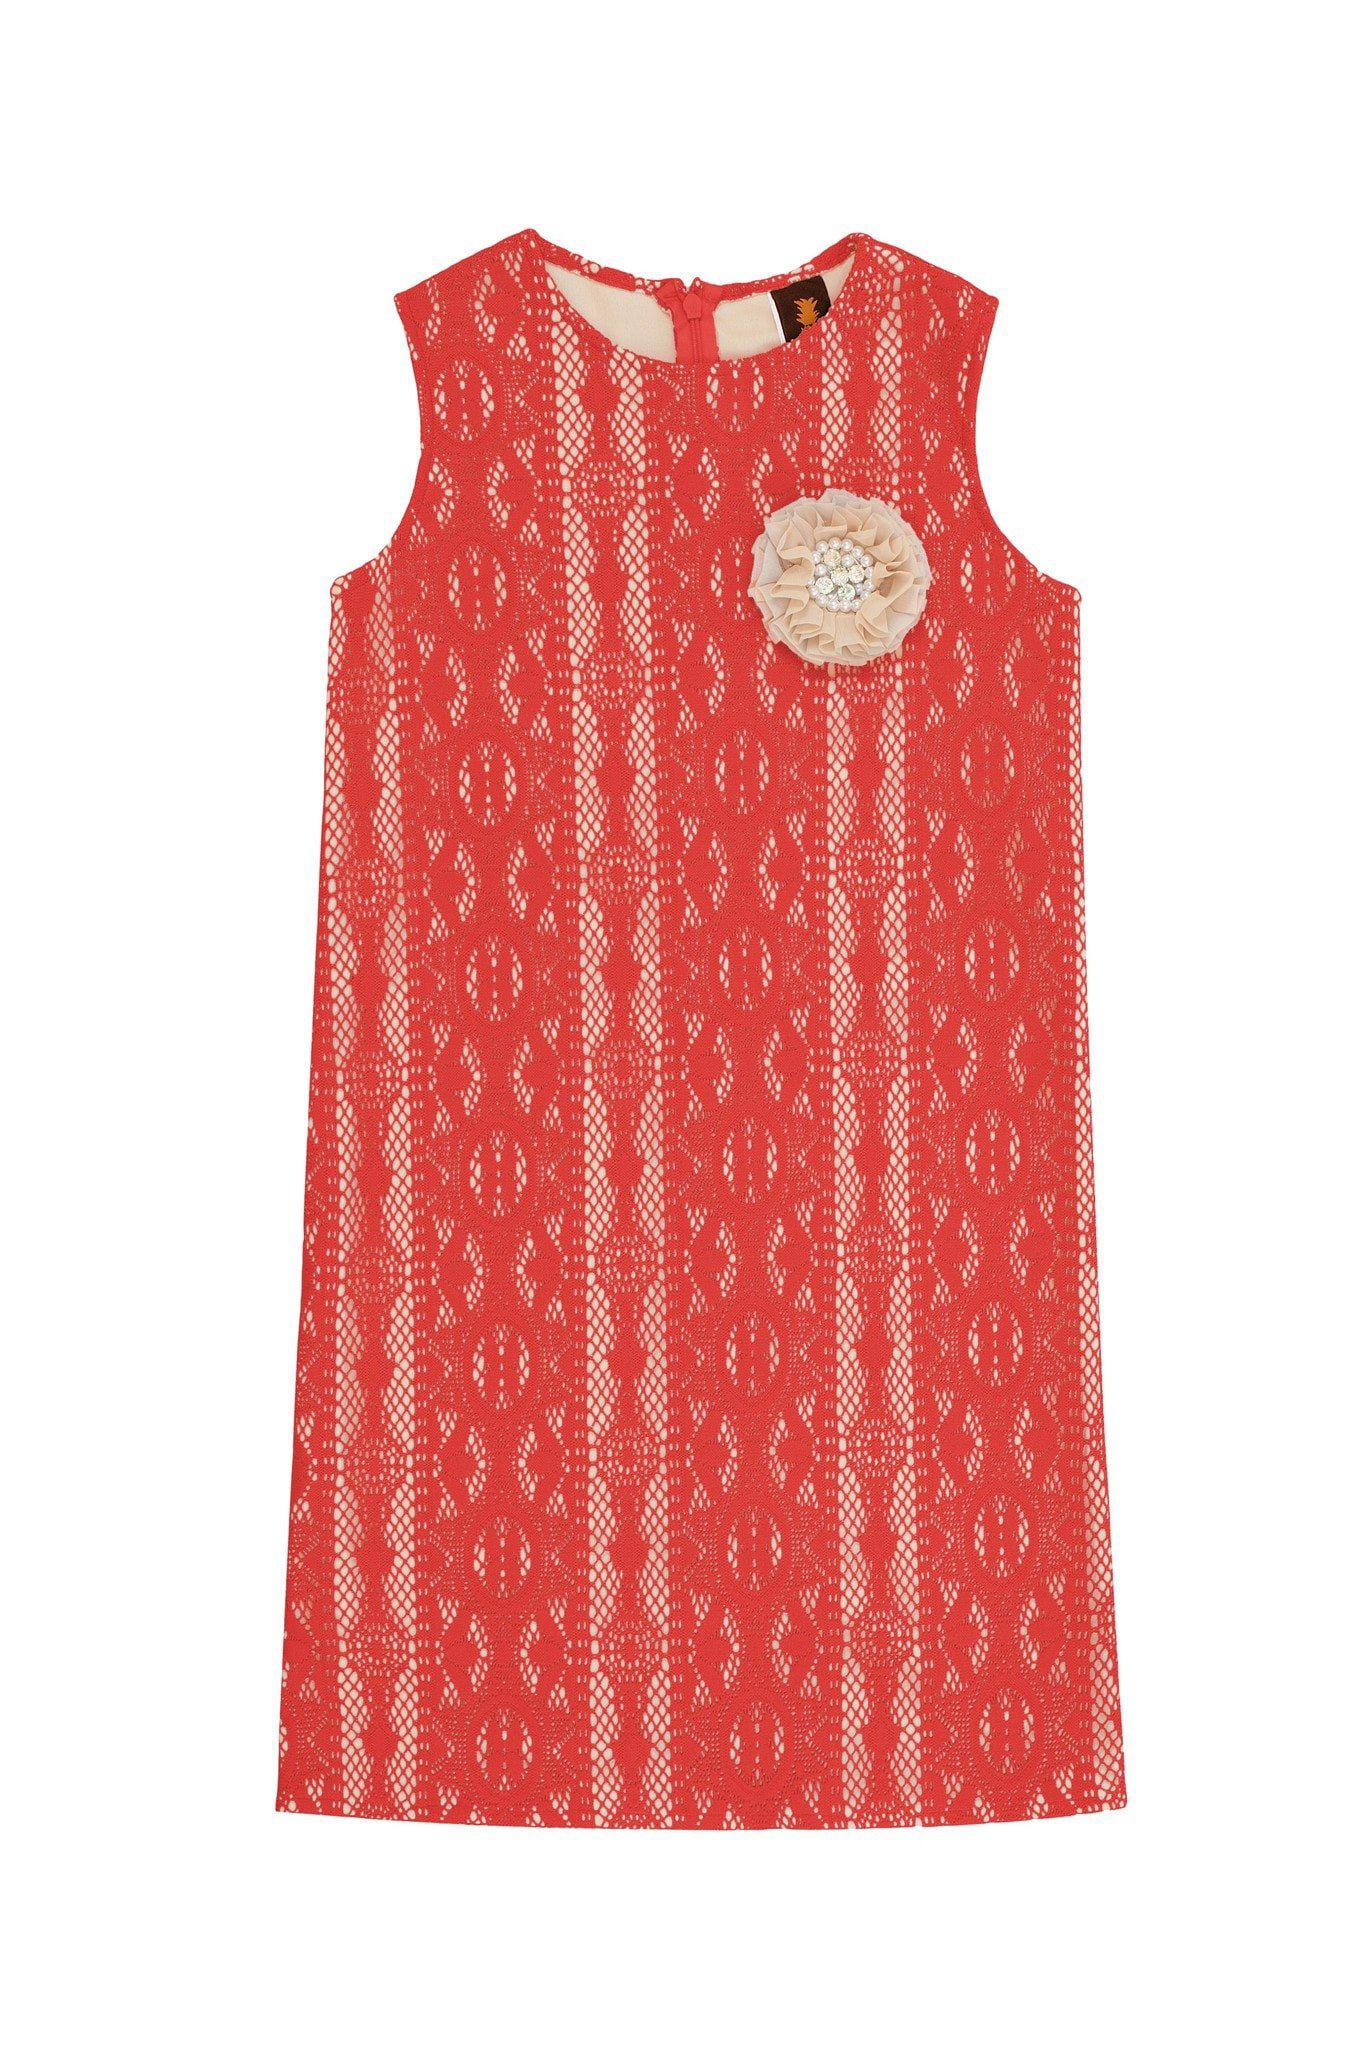 Coral Red Crochet Lace Fancy Summer Party Shift Dress - Girls - Pineapple Clothing